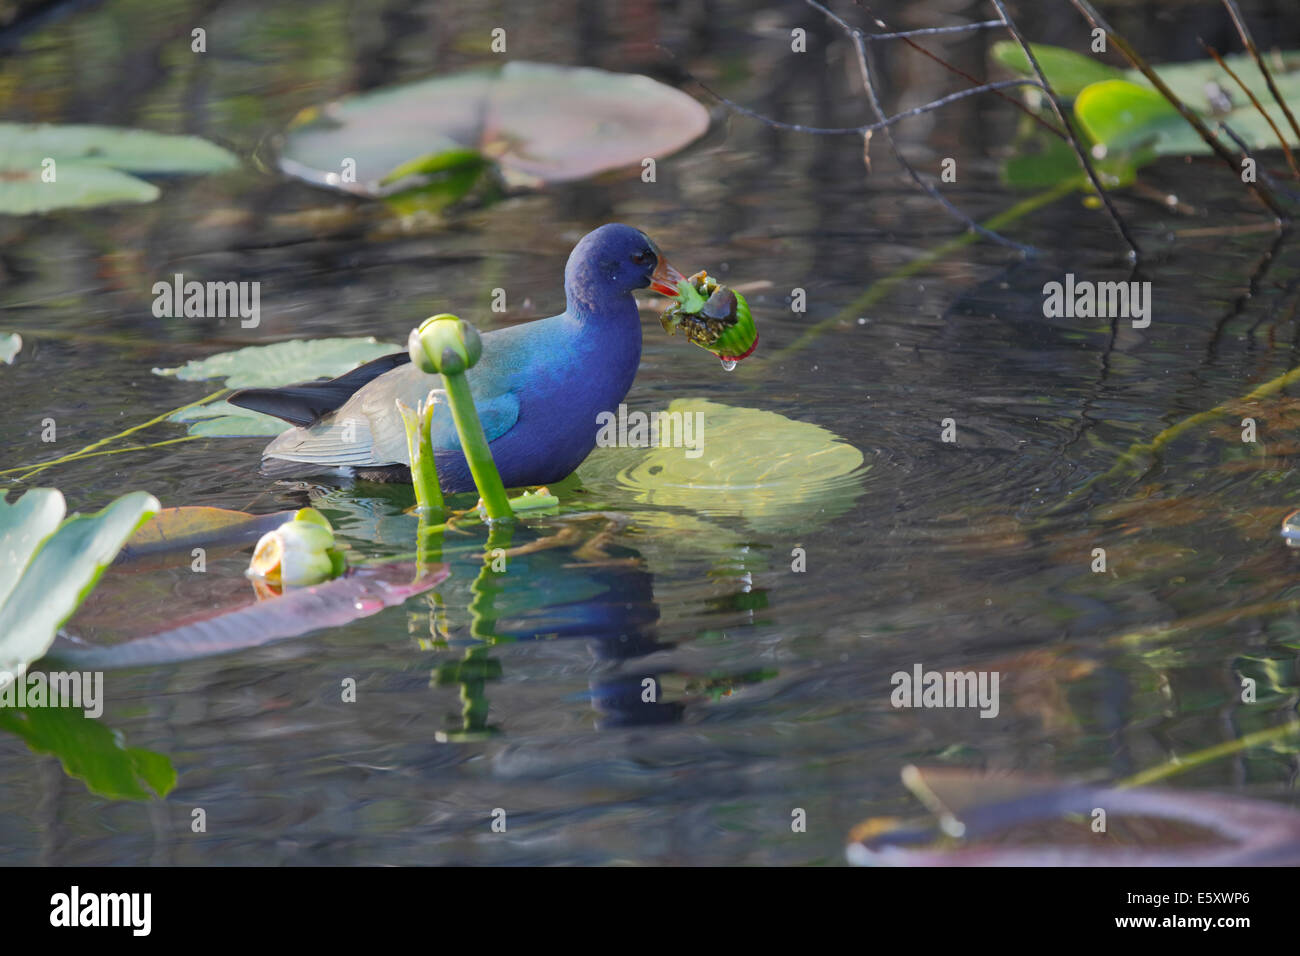 Purple Gallinule (Porphyrio martinica) eating water lily flower Stock Photo